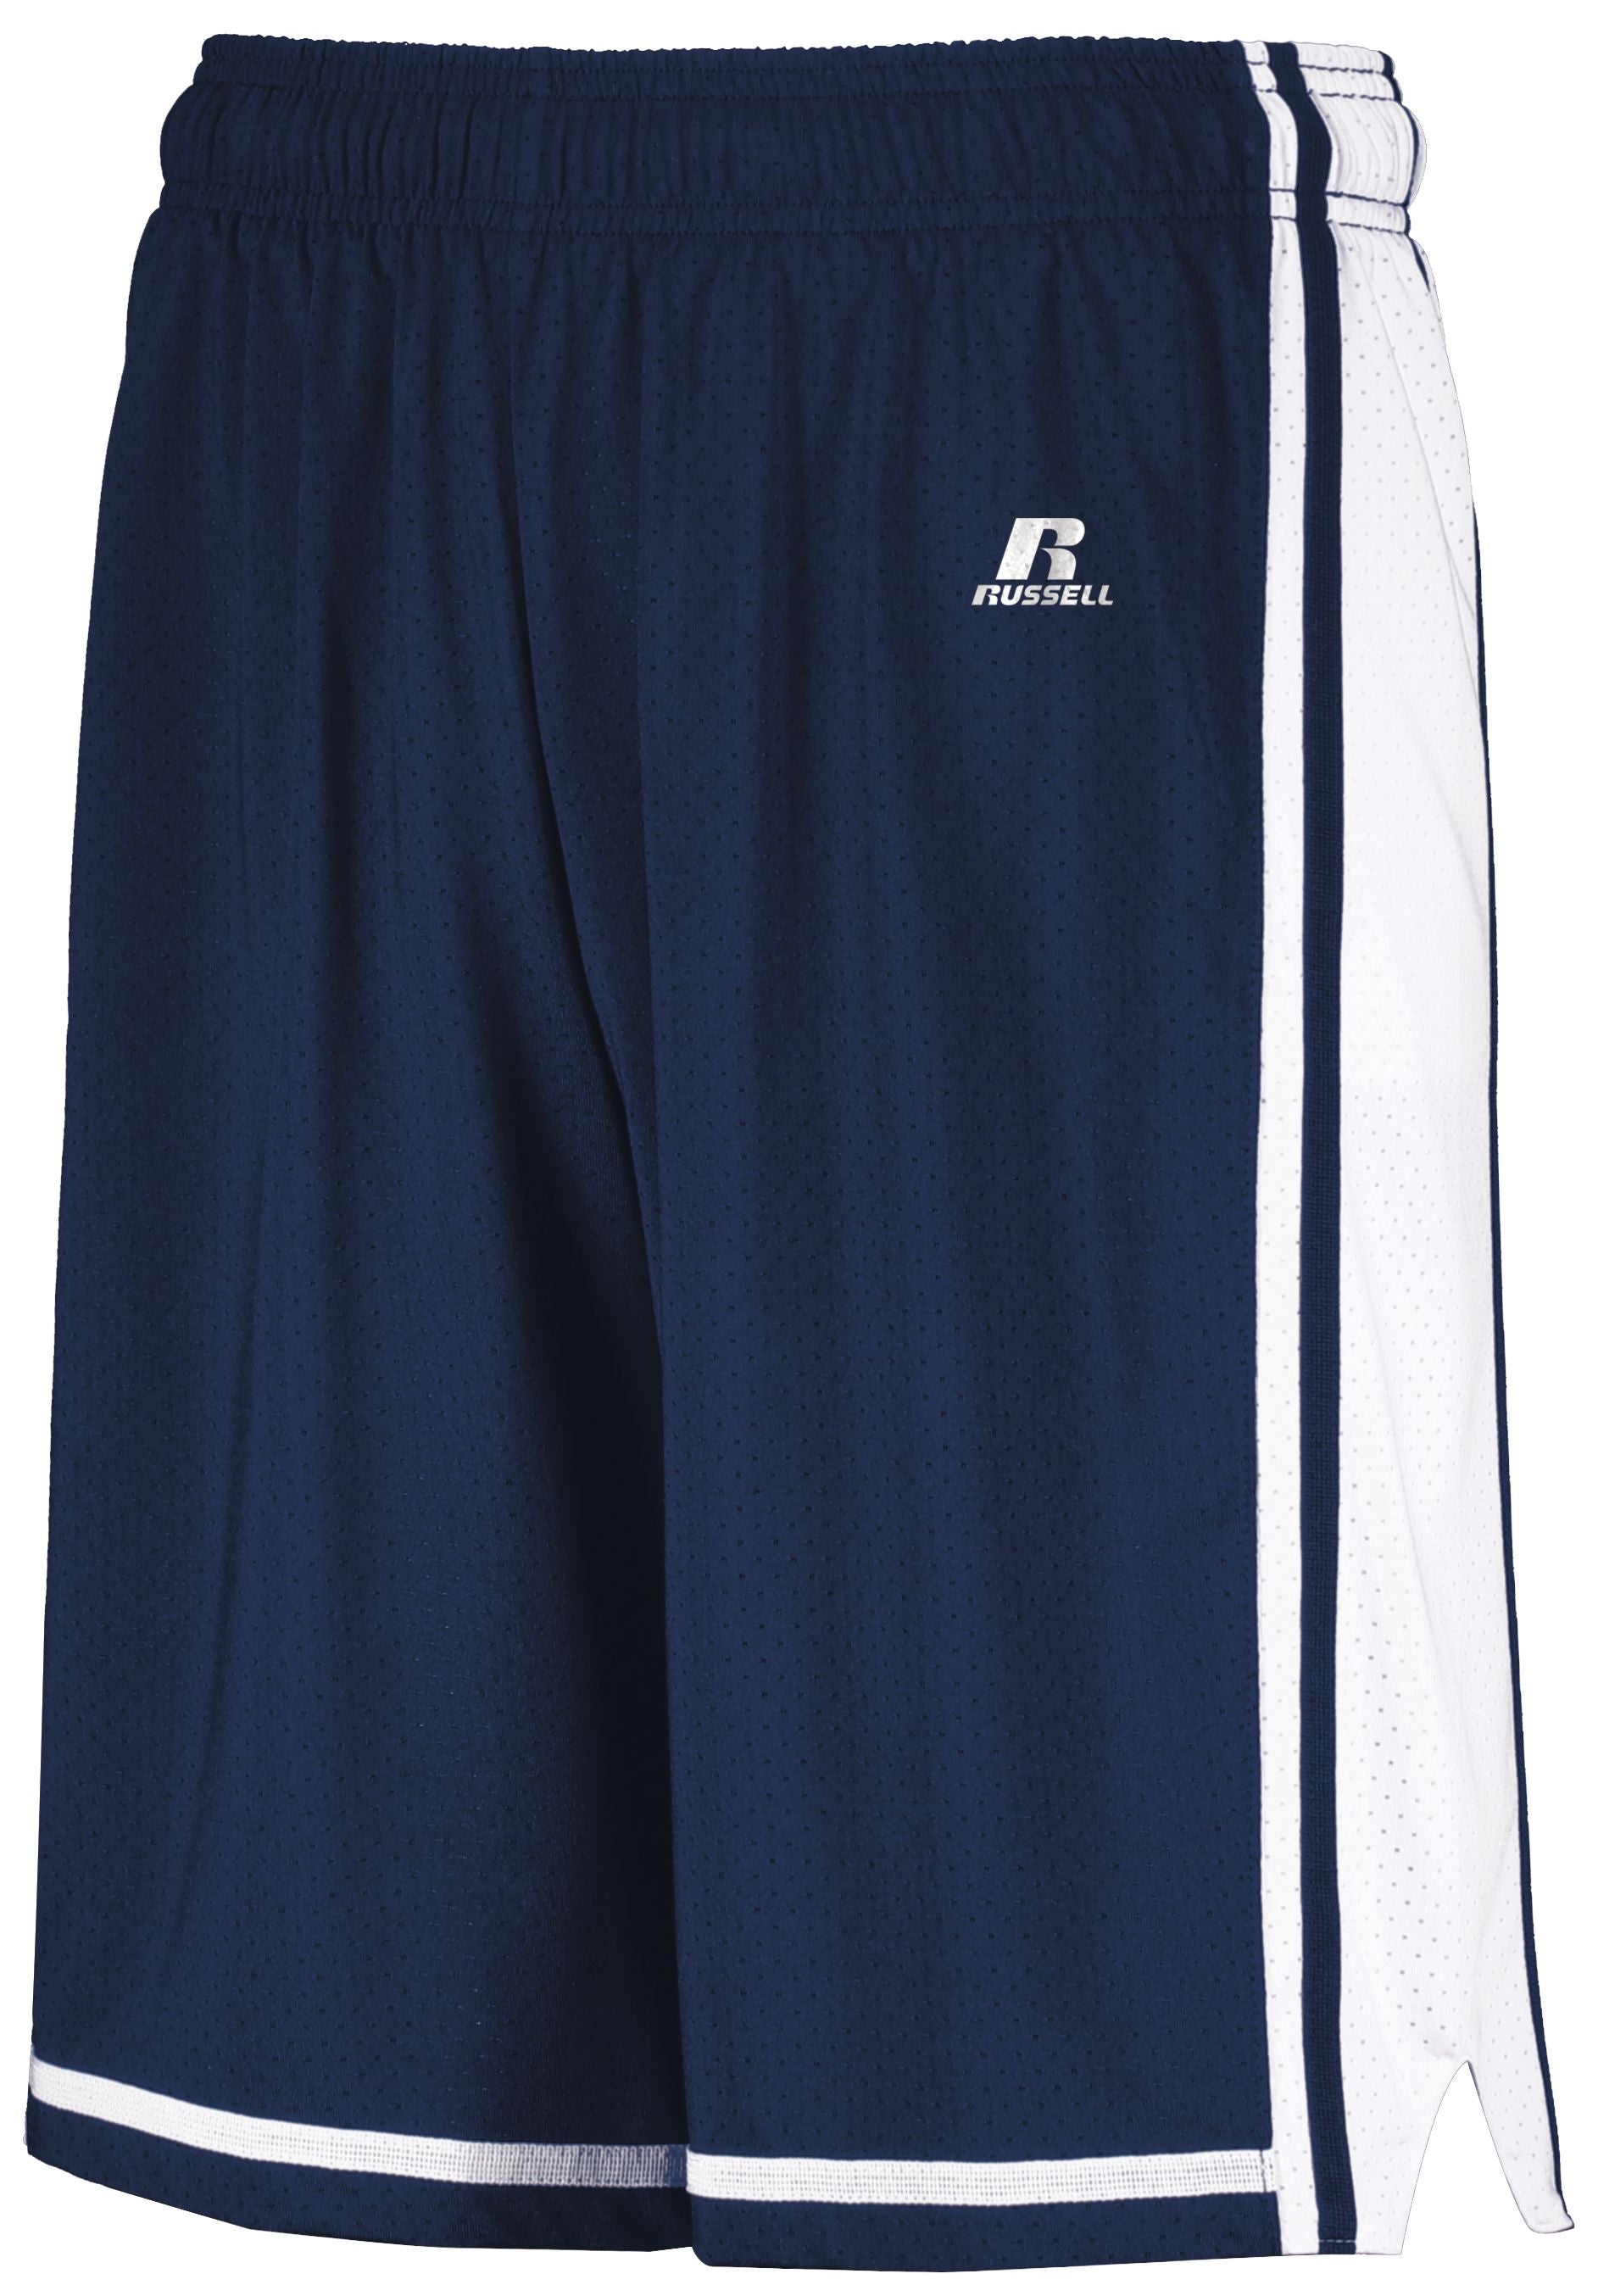 Russell Athletic Legacy Basketball Shorts in Navy/White  -Part of the Adult, Adult-Shorts, Basketball, Russell-Athletic-Products, All-Sports, All-Sports-1 product lines at KanaleyCreations.com